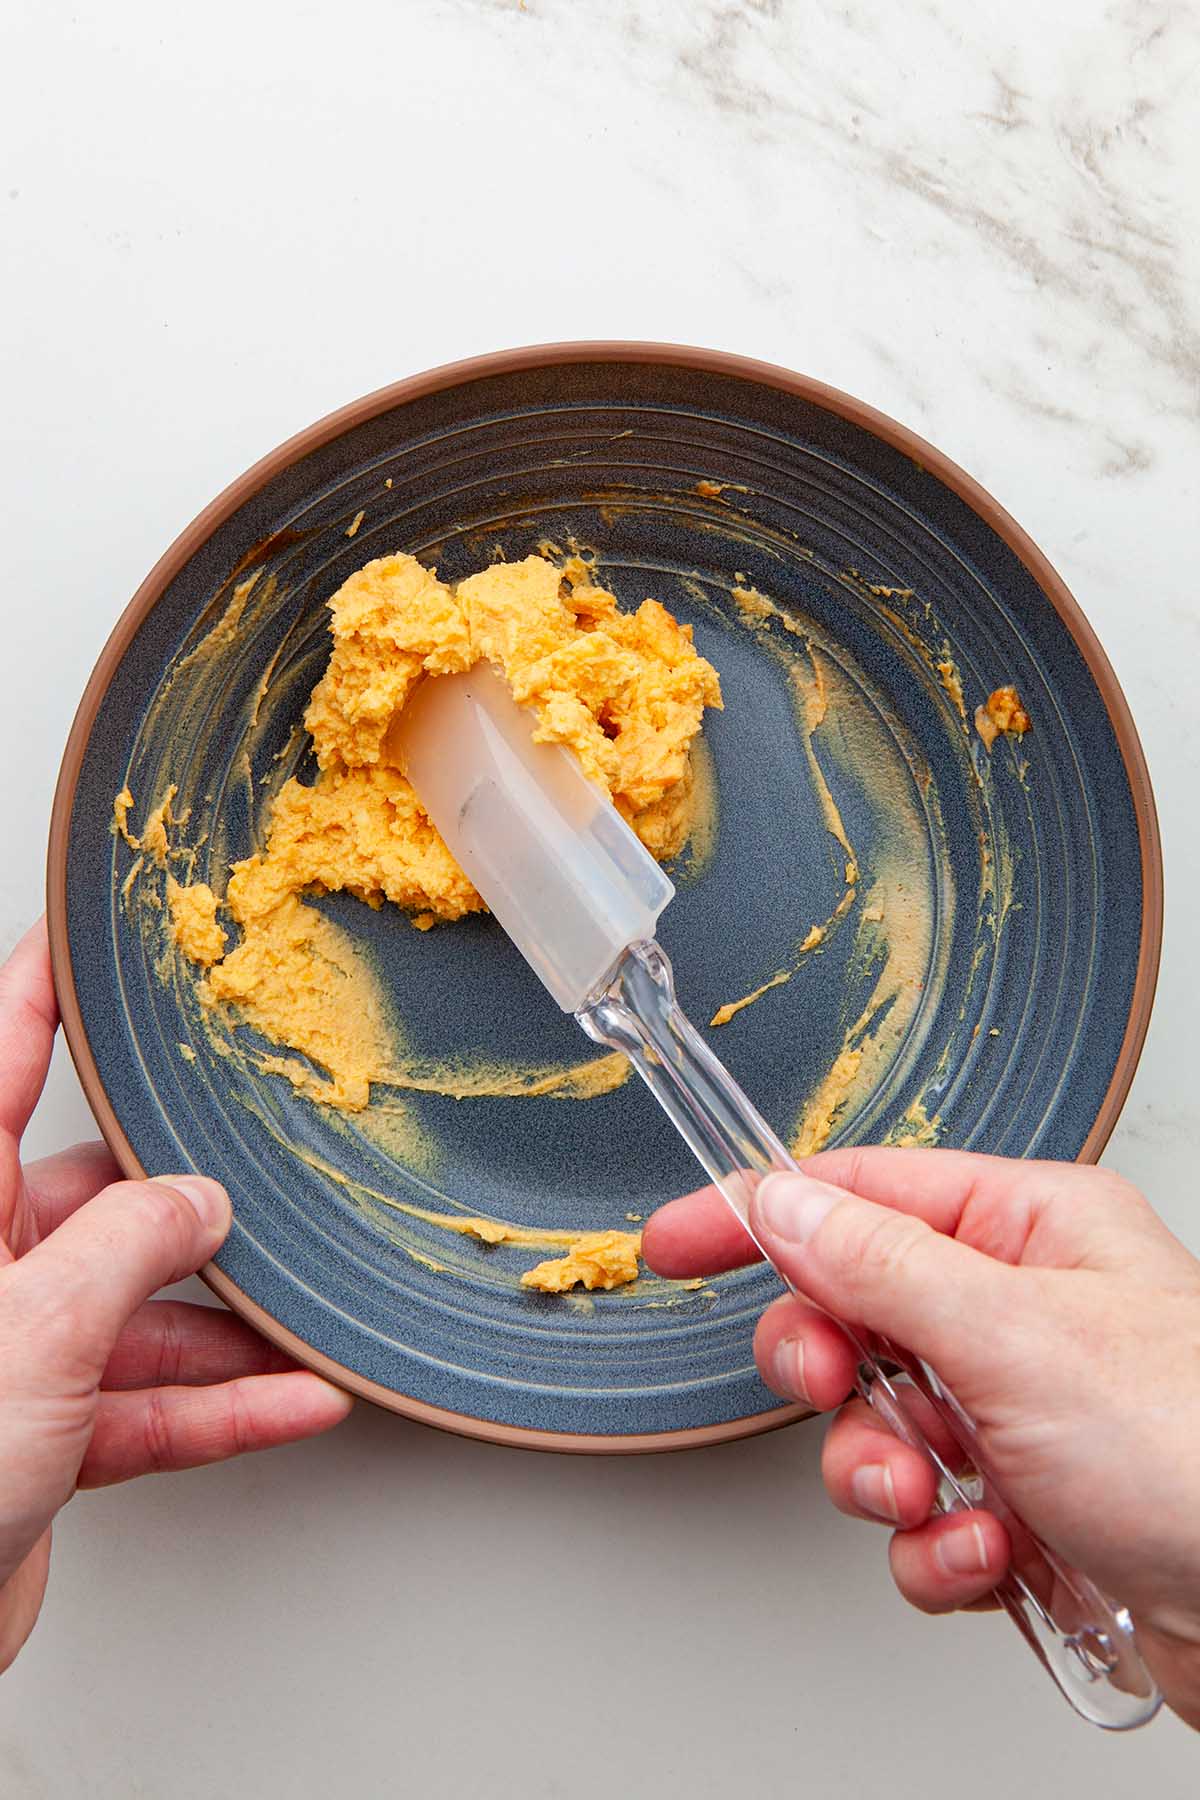 Hands mixing hard boiled mashed eggs yolks with a rubber spatula.